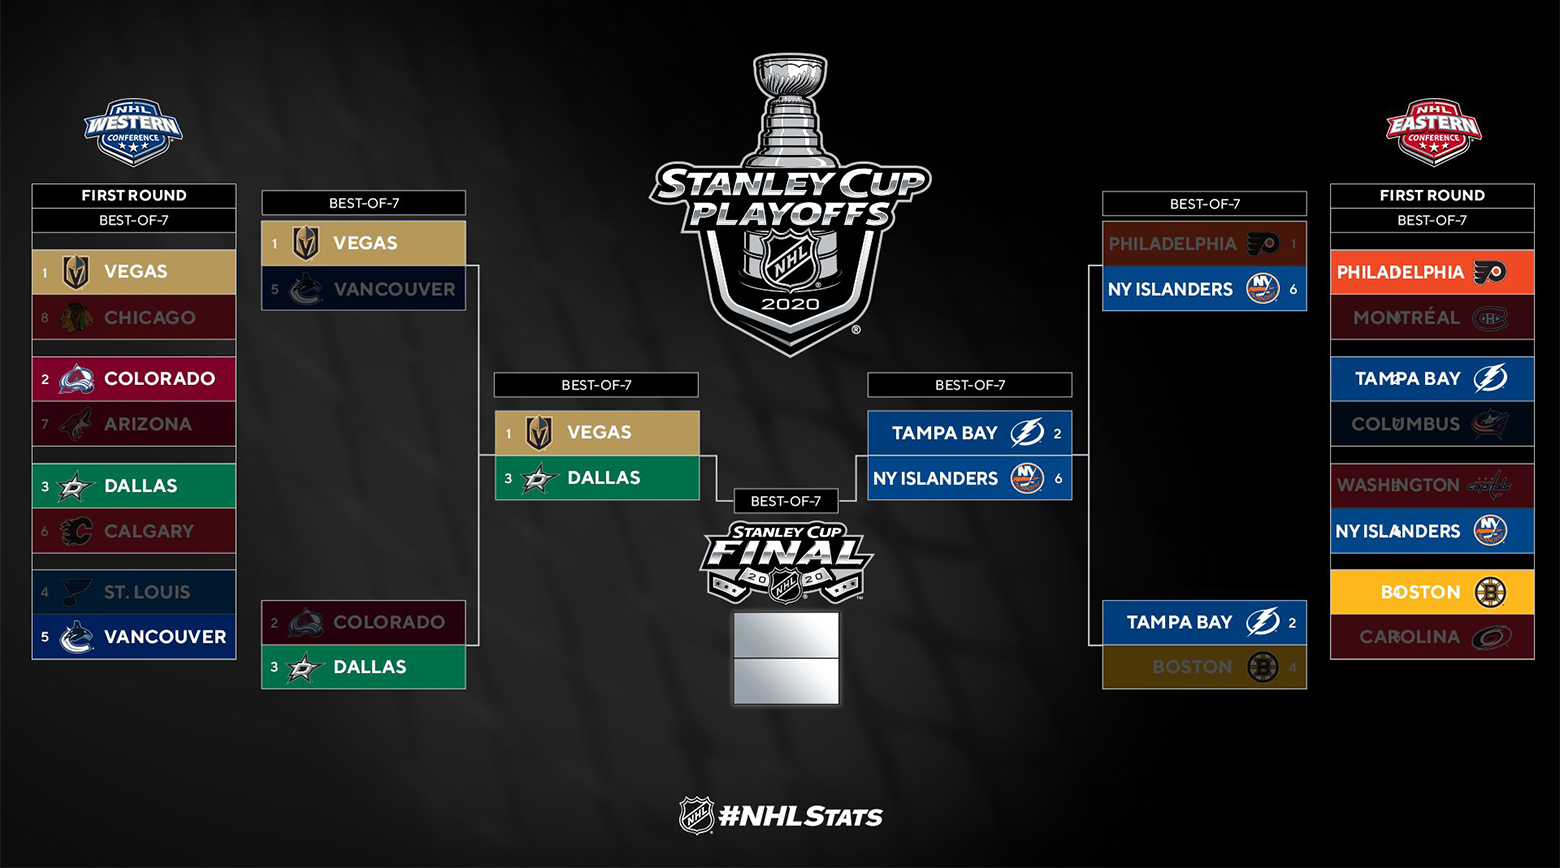 2020 NHL playoffs: Conference Finals schedule, predictions and analysis – The Swing of Things